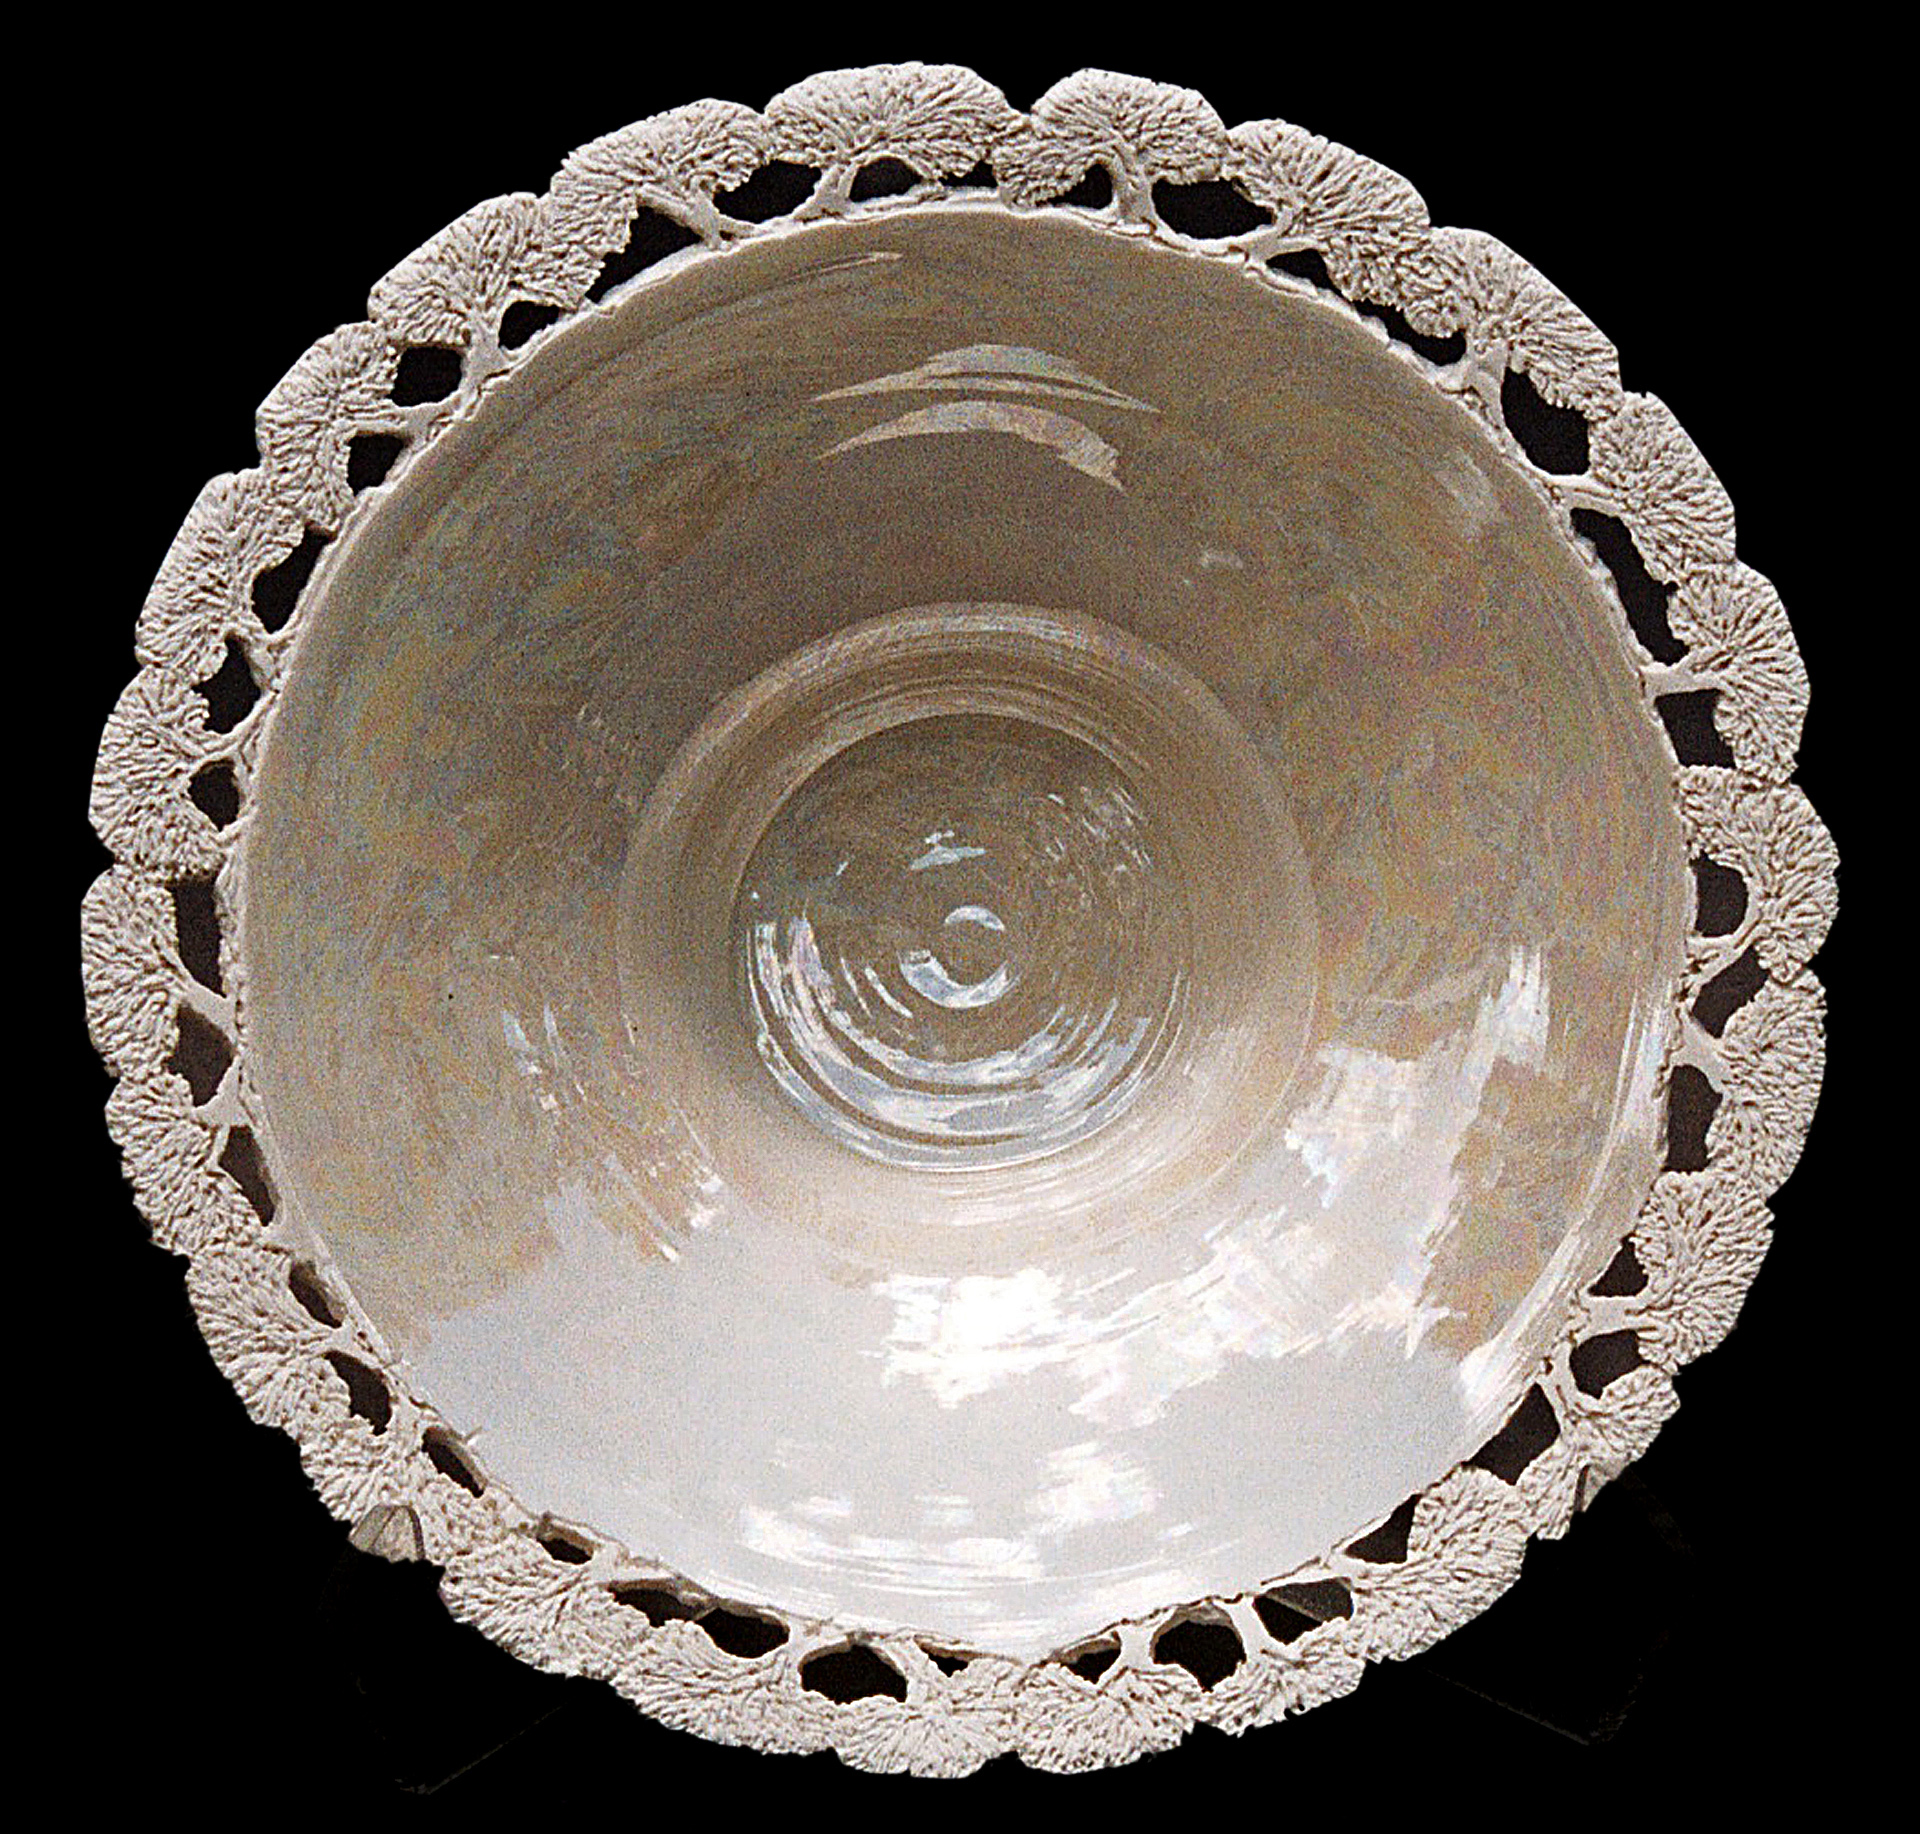 Peters _Flaring Bowl with rim of trees_posrer.jpg